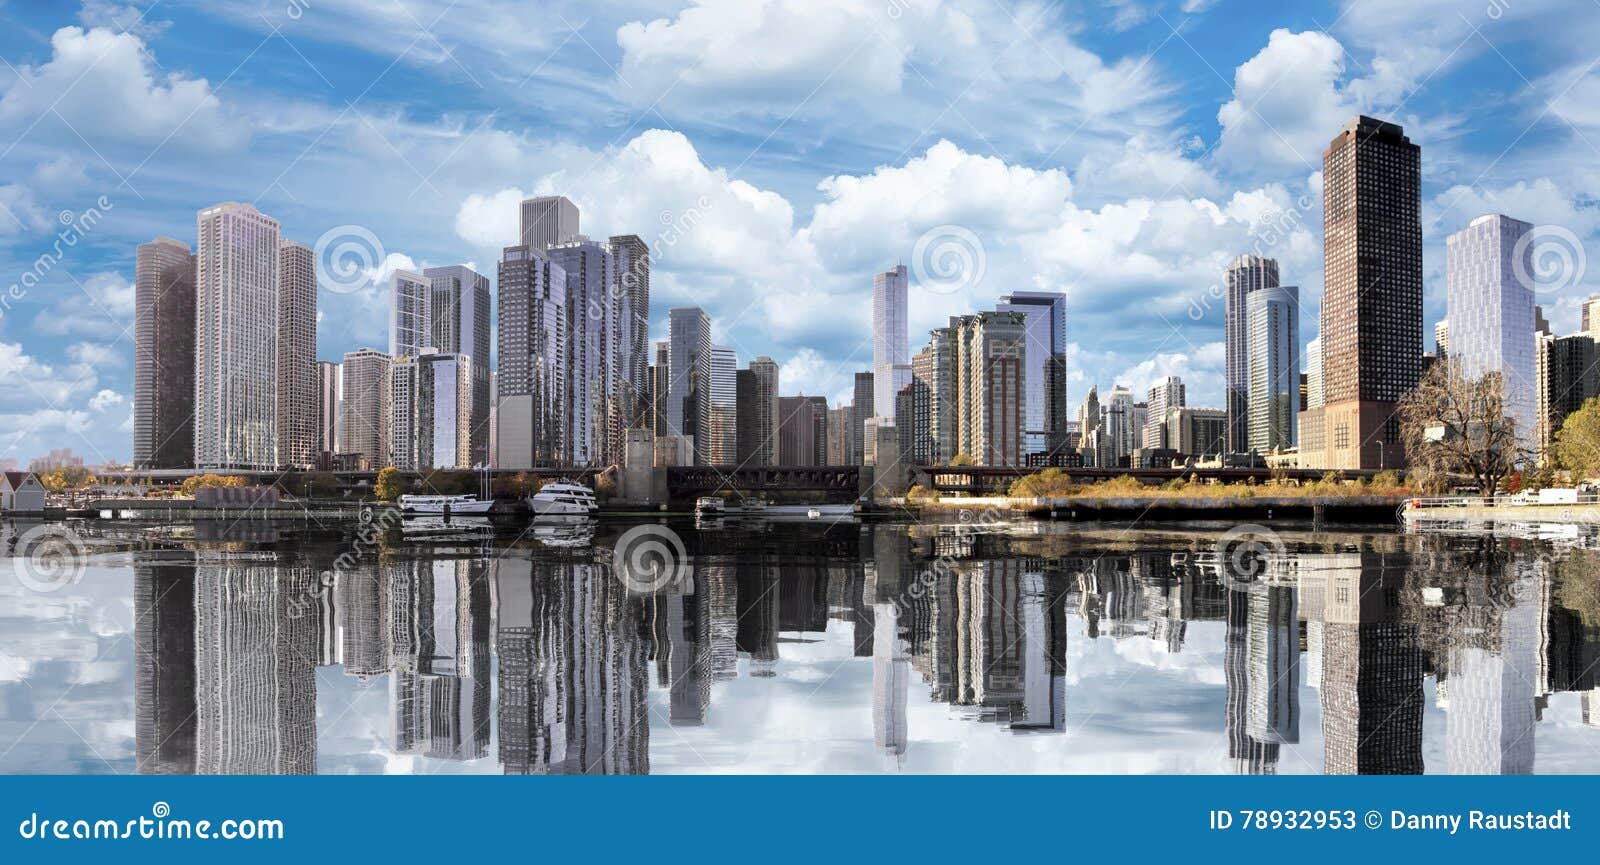 downtown chicago cityscape skyline reflections